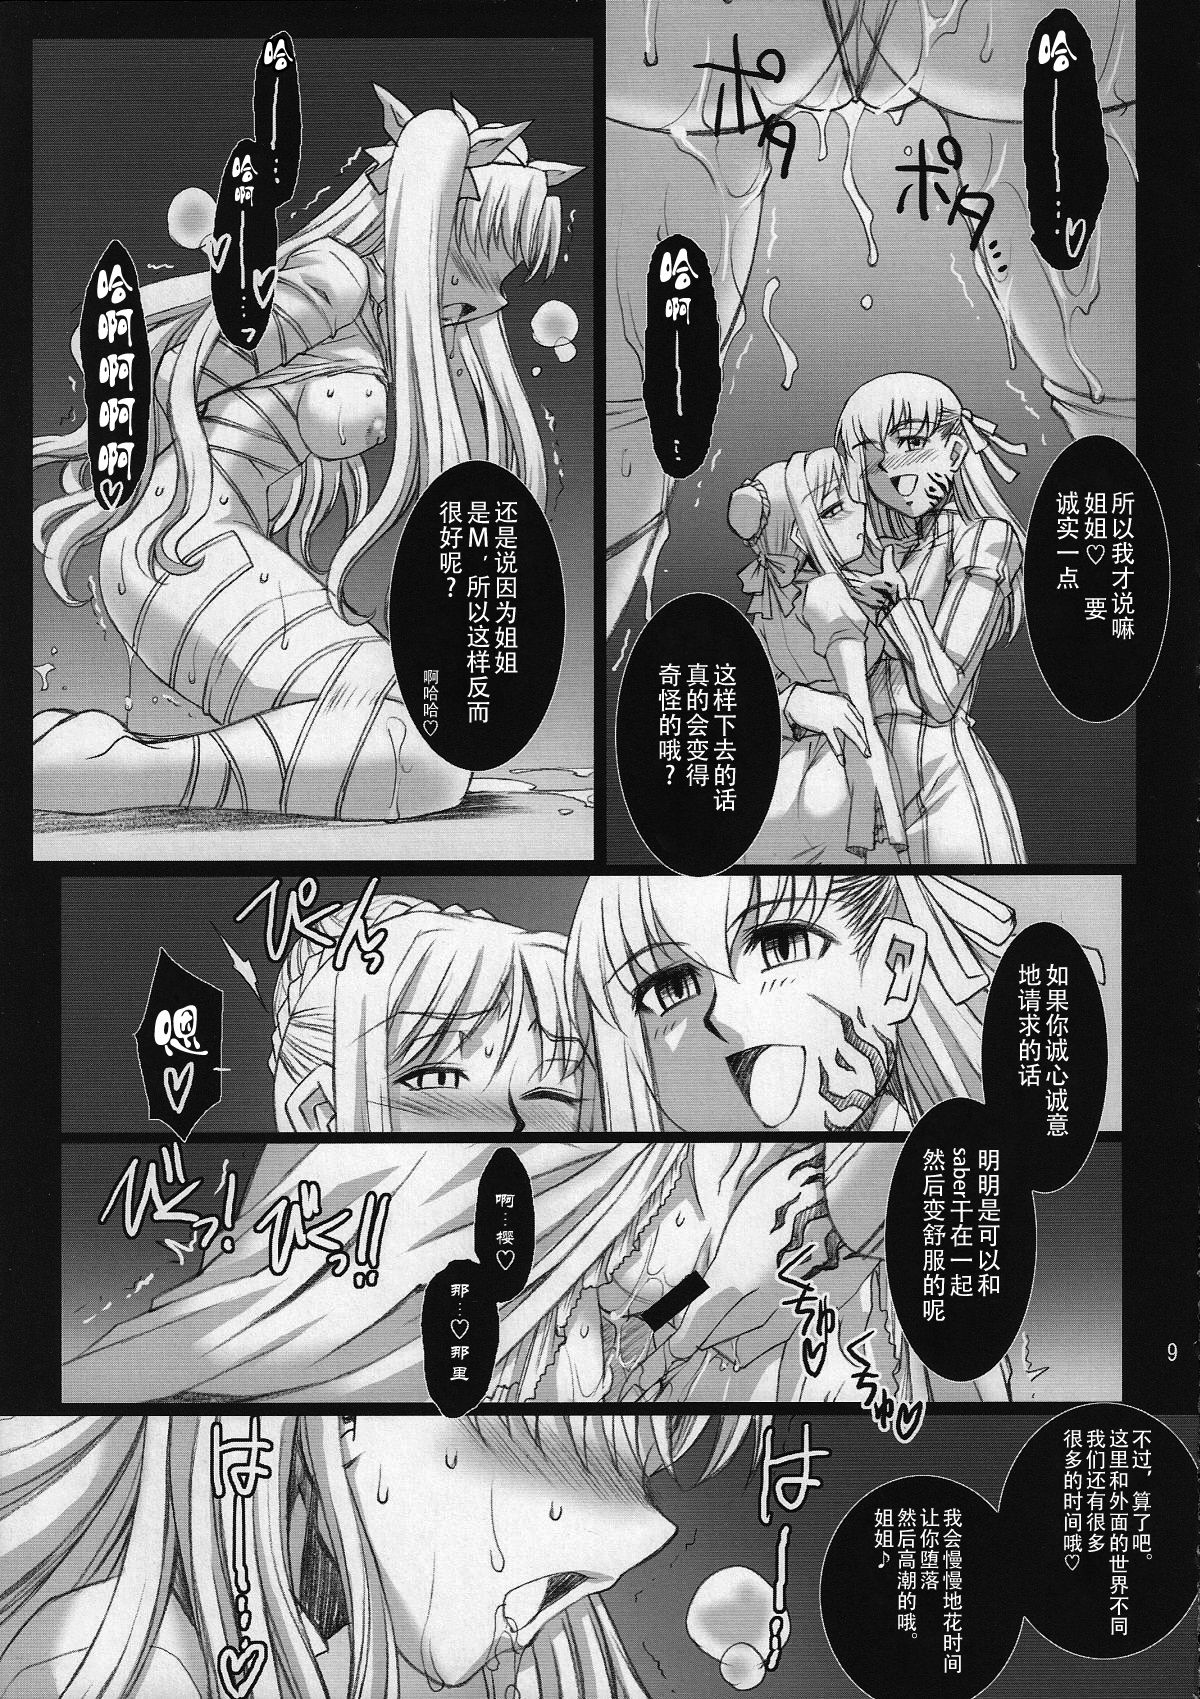 (COMIC1☆2) [H.B (B-RIVER)] Red Degeneration -DAY/3- (Fate/stay night) [Chinese] [不咕鸟汉化组] page 8 full